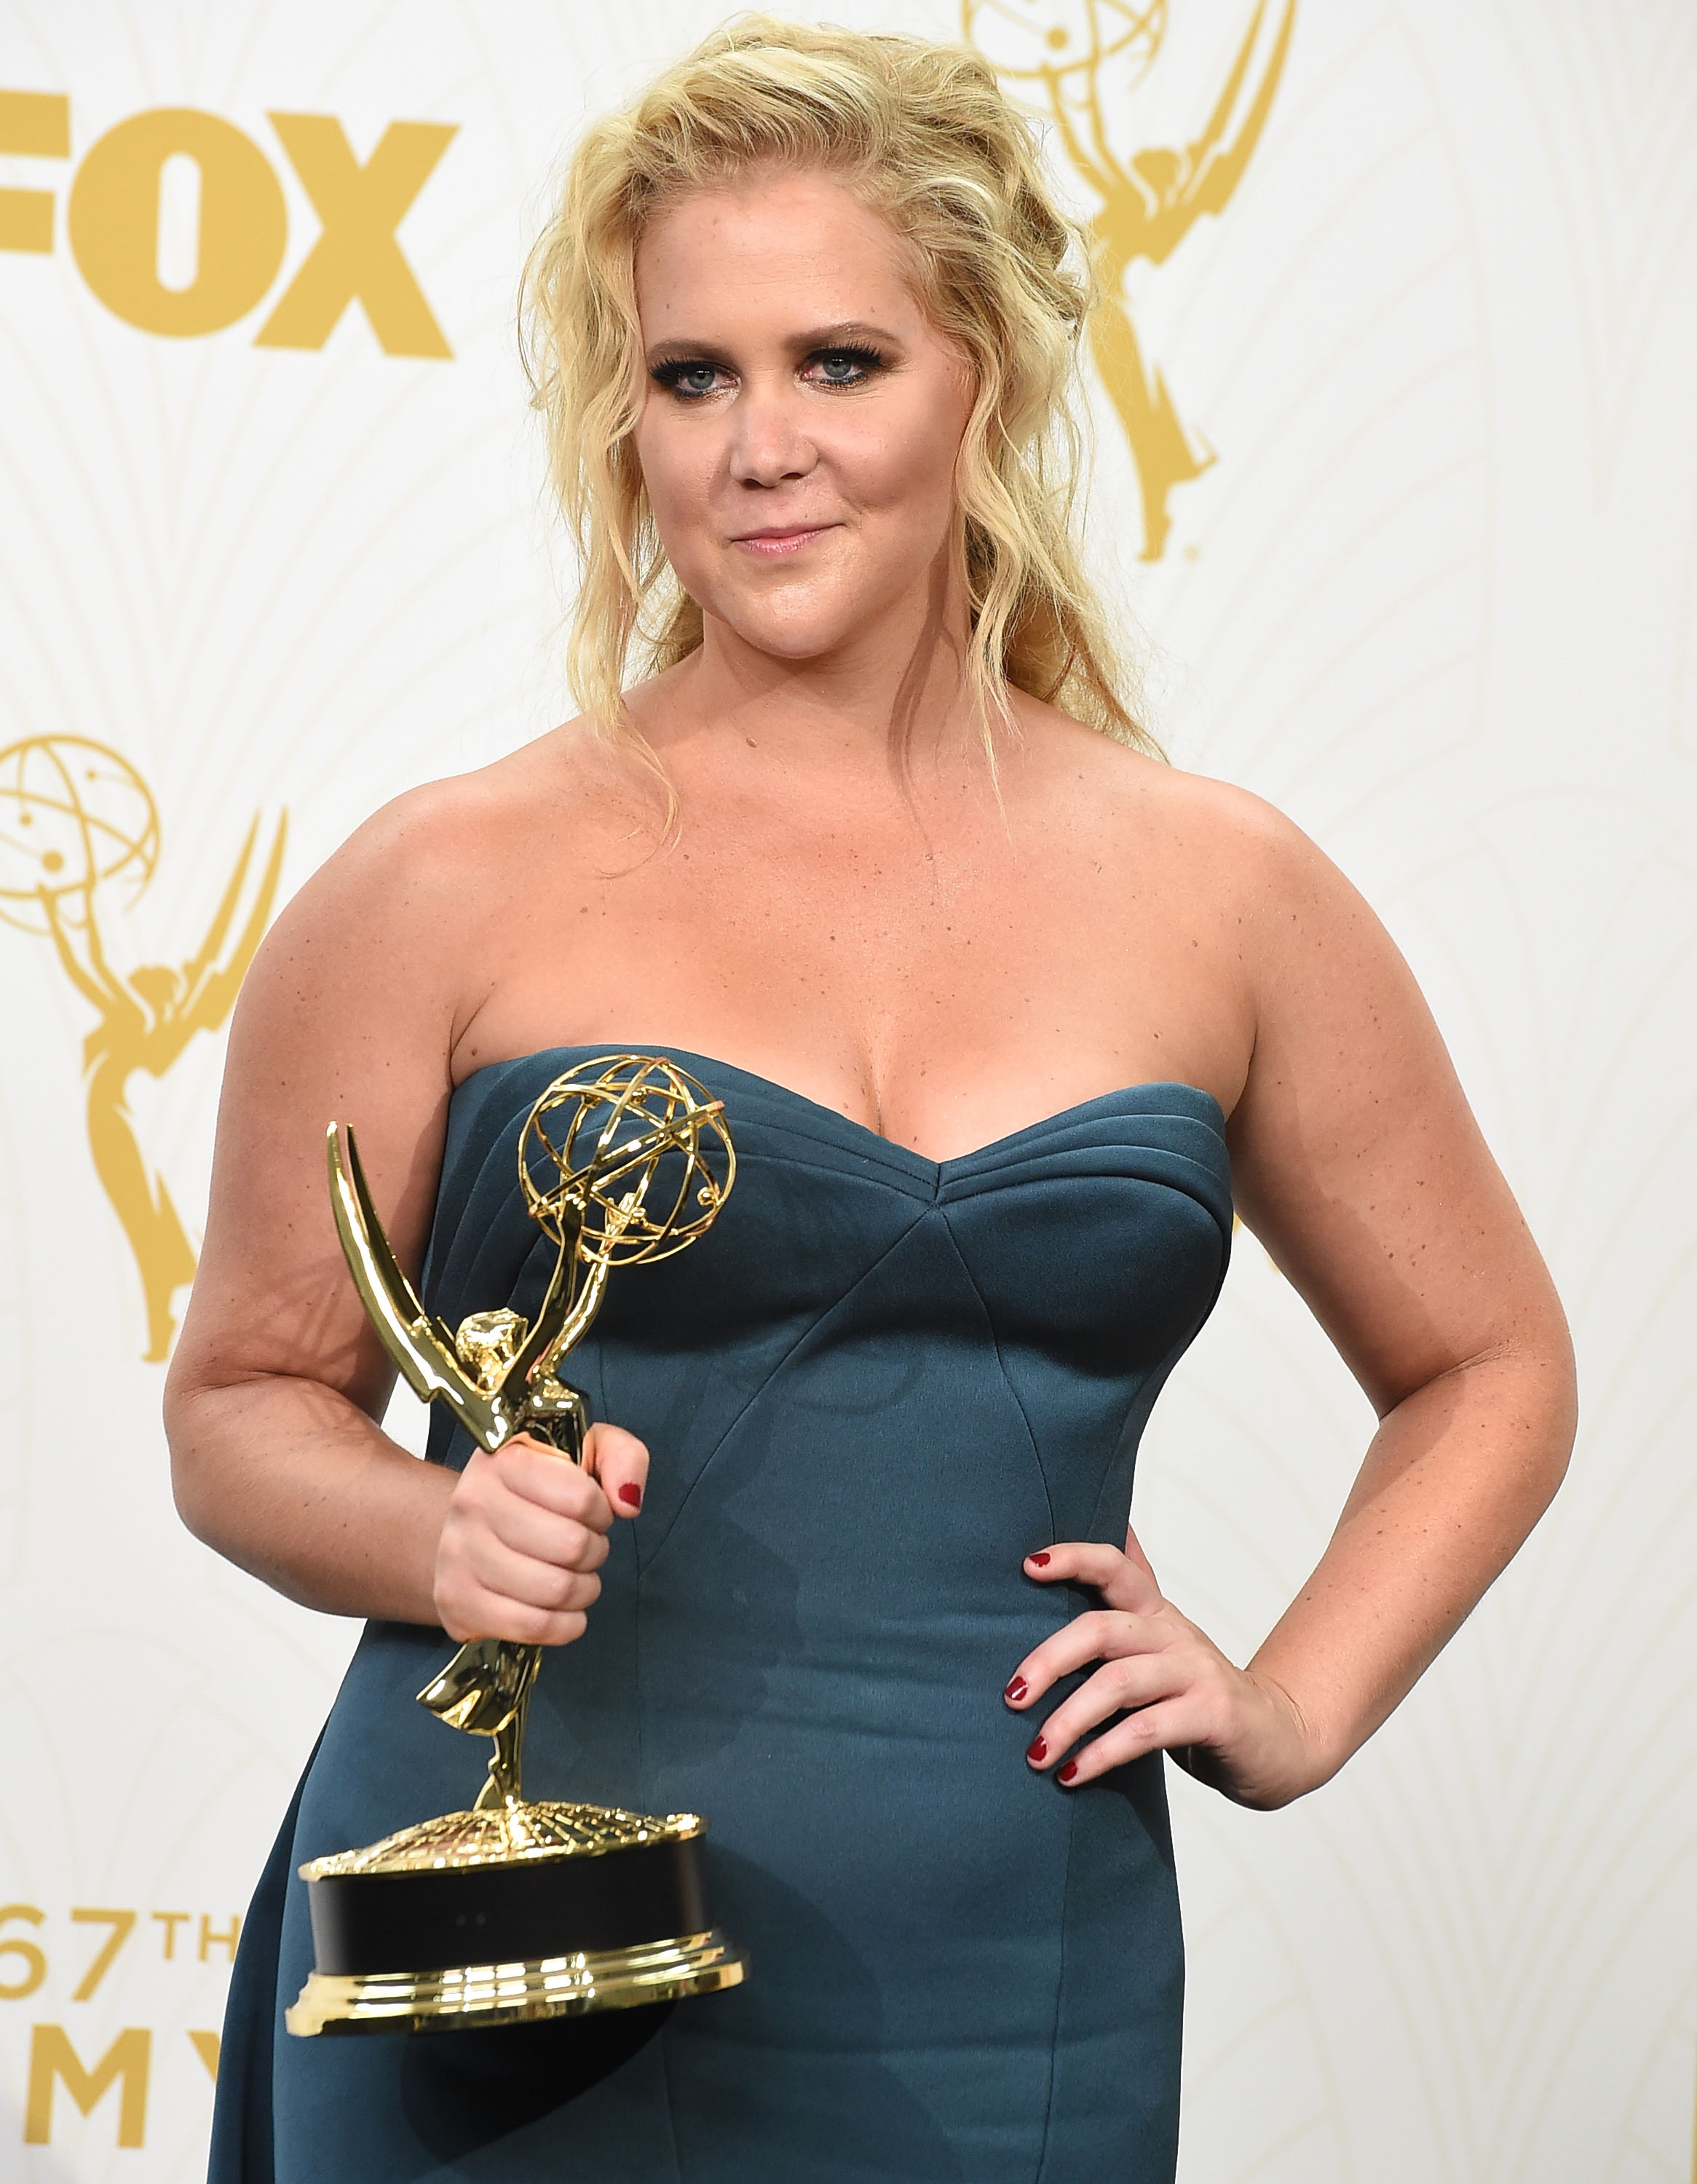 Amy Schumer poses at the 67th Annual Primetime Emmy Awards at Microsoft Theater on September 20, 2015 in Los Angeles, California. (Steve Granitz&mdash;WireImage/Getty Images)